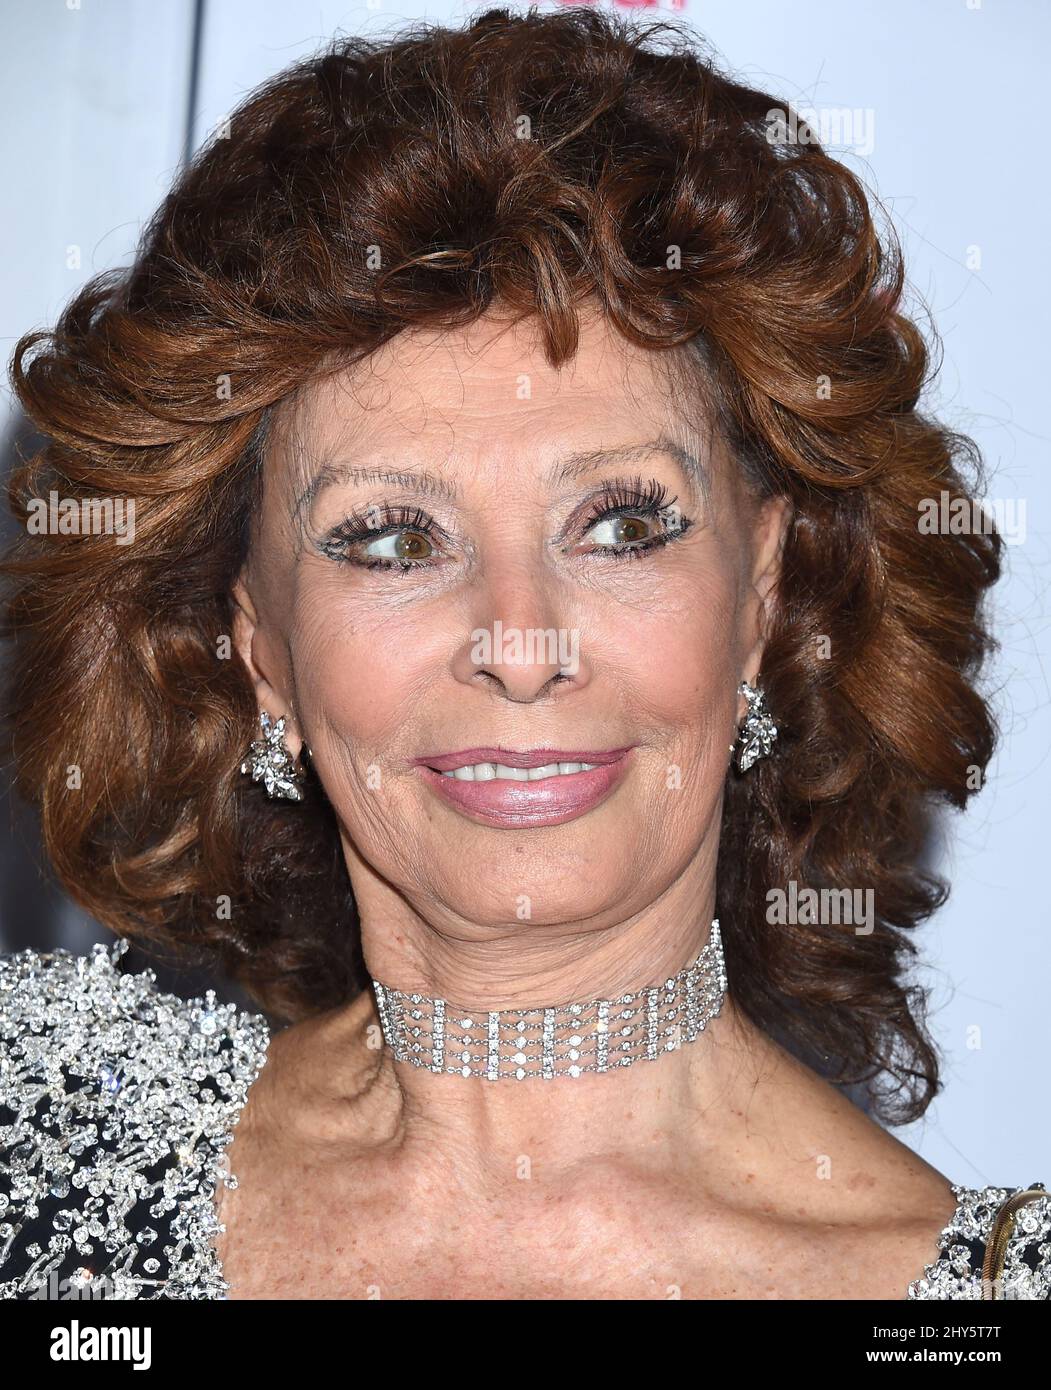 Actress Sofia Loren attends the special tribute to her during the AFI FEST 2014 at Dolby Theatre on Wednesday, Nov. 12, 2014 in Hollywood, CA. Stock Photo